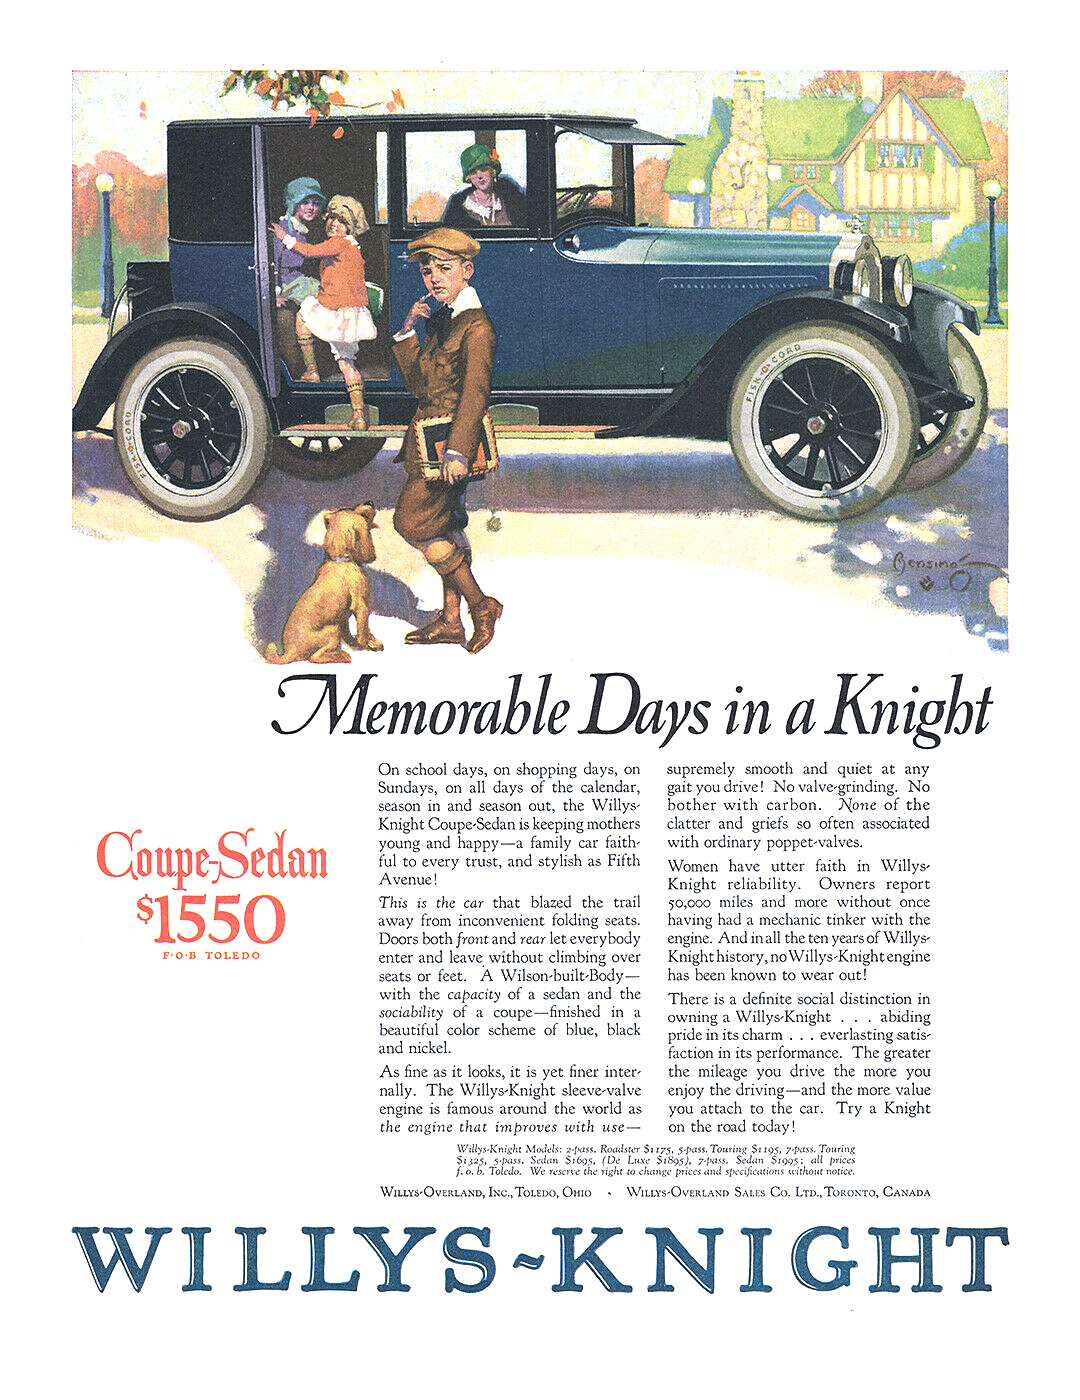 Willys-Knight Coupe-Sedan Ad (September, 1924) – Memorable Days in a Knight